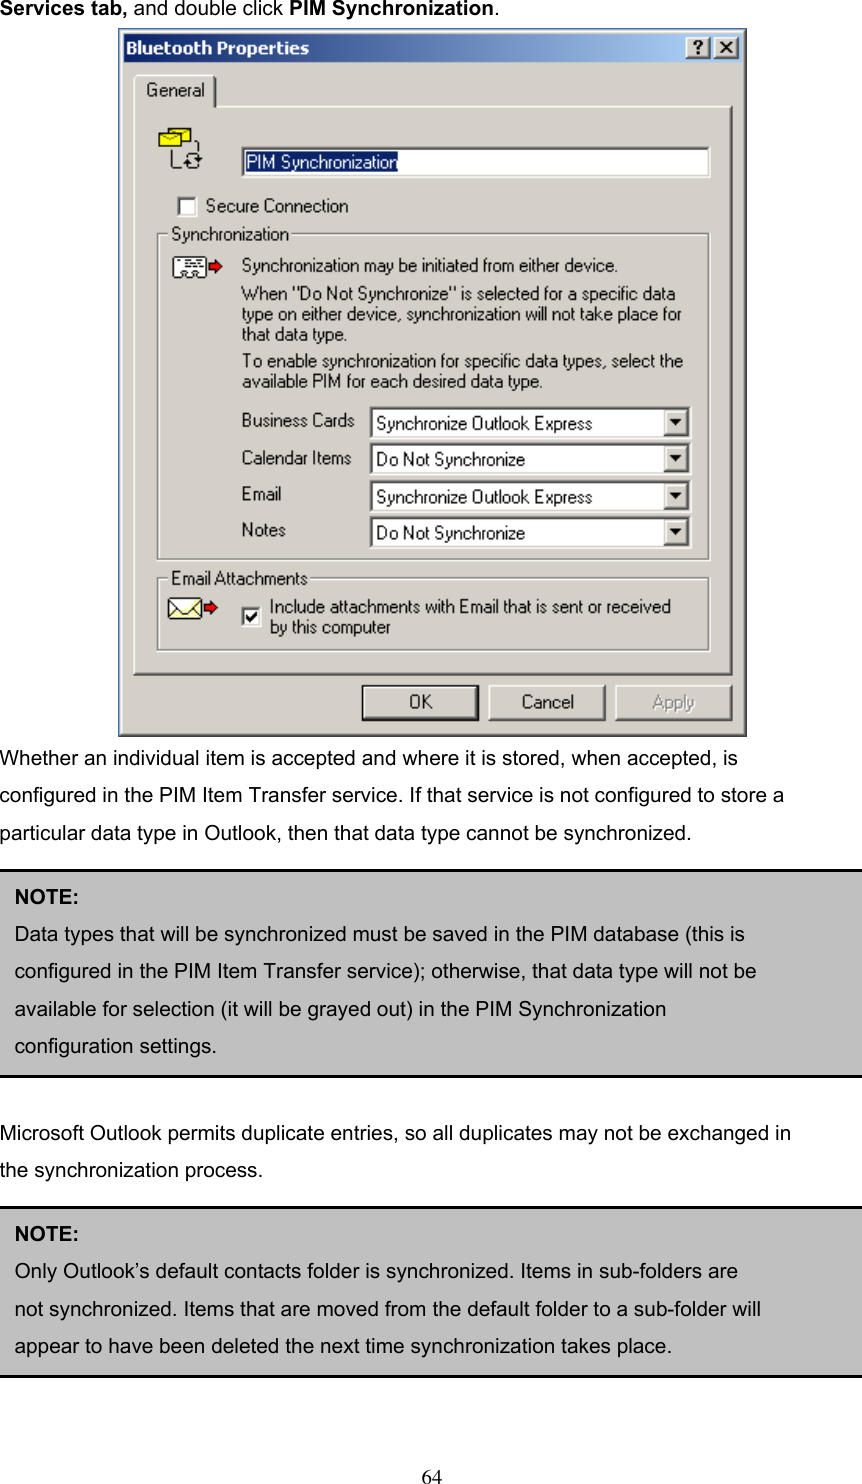 Services tab, and double click PIM Synchronization.  Whether an individual item is accepted and where it is stored, when accepted, is configured in the PIM Item Transfer service. If that service is not configured to store a particular data type in Outlook, then that data type cannot be synchronized.        NOTE:  Data types that will be synchronized must be saved in the PIM database (this is configured in the PIM Item Transfer service); otherwise, that data type will not be available for selection (it will be grayed out) in the PIM Synchronization configuration settings. Microsoft Outlook permits duplicate entries, so all duplicates may not be exchanged in the synchronization process.       NOTE:  Only Outlook’s default contacts folder is synchronized. Items in sub-folders are not synchronized. Items that are moved from the default folder to a sub-folder will appear to have been deleted the next time synchronization takes place.  64 